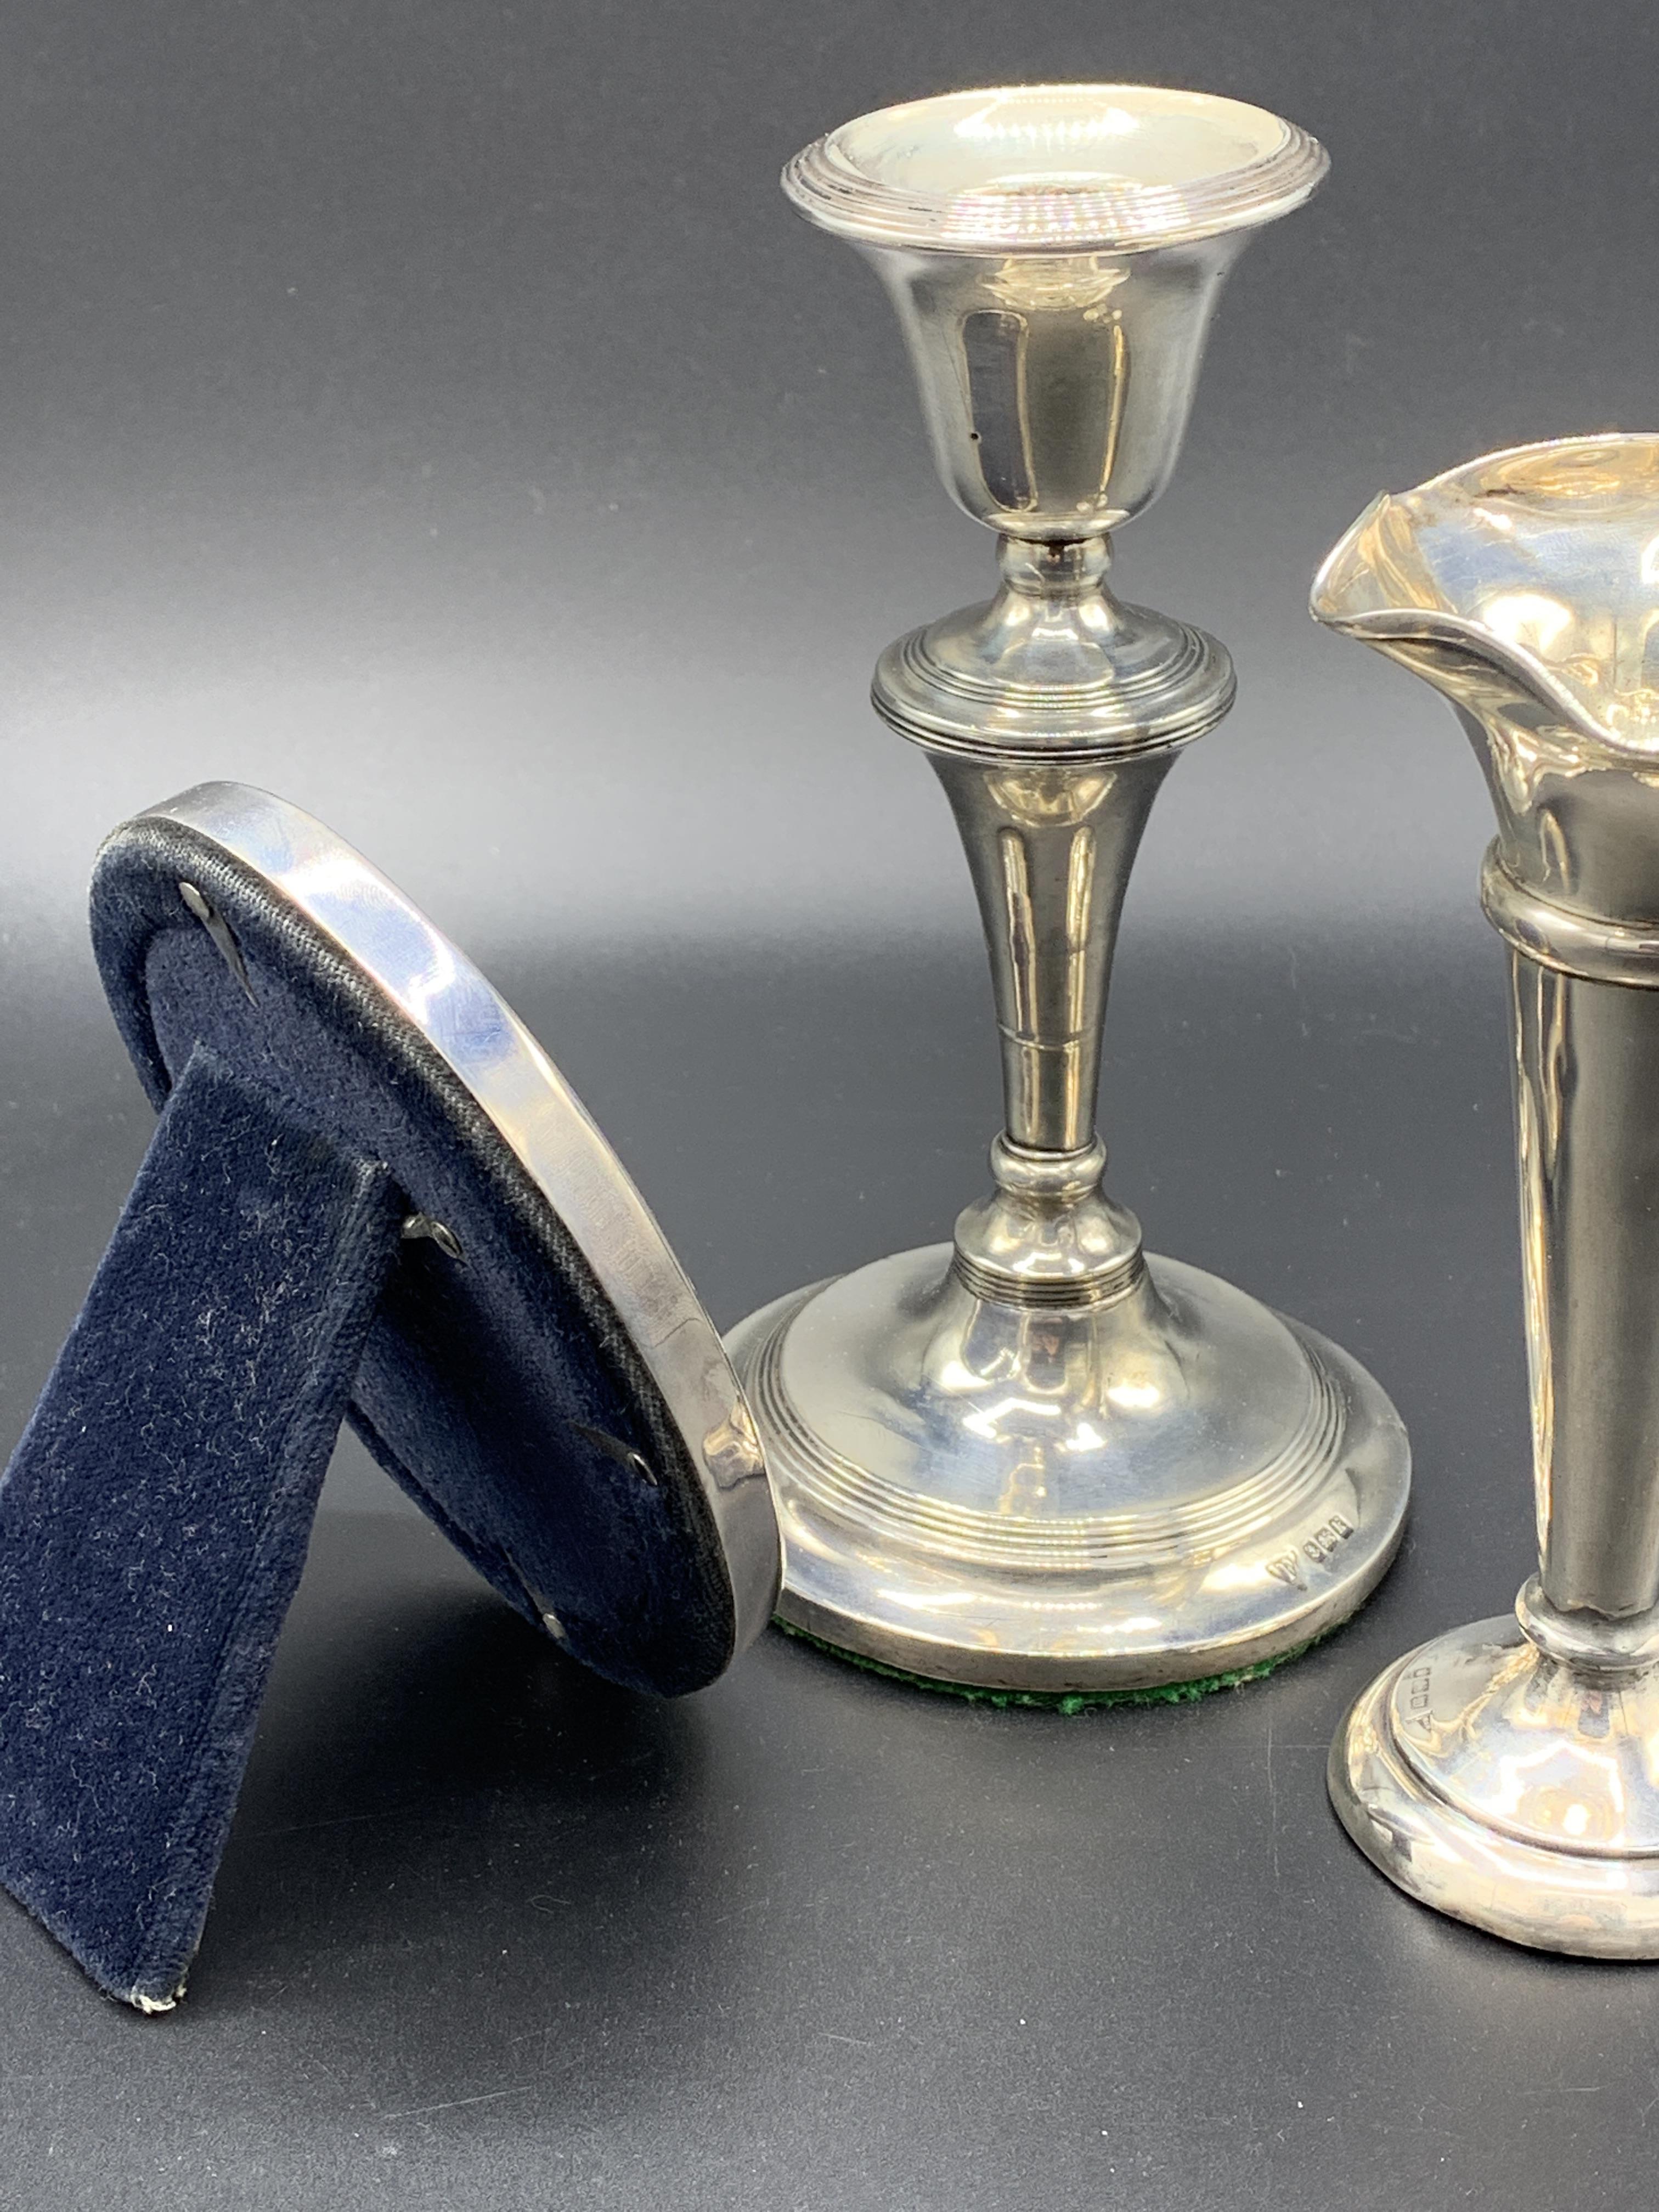 A hallmarked silver bud vase, candlestick, and frame - Image 5 of 5